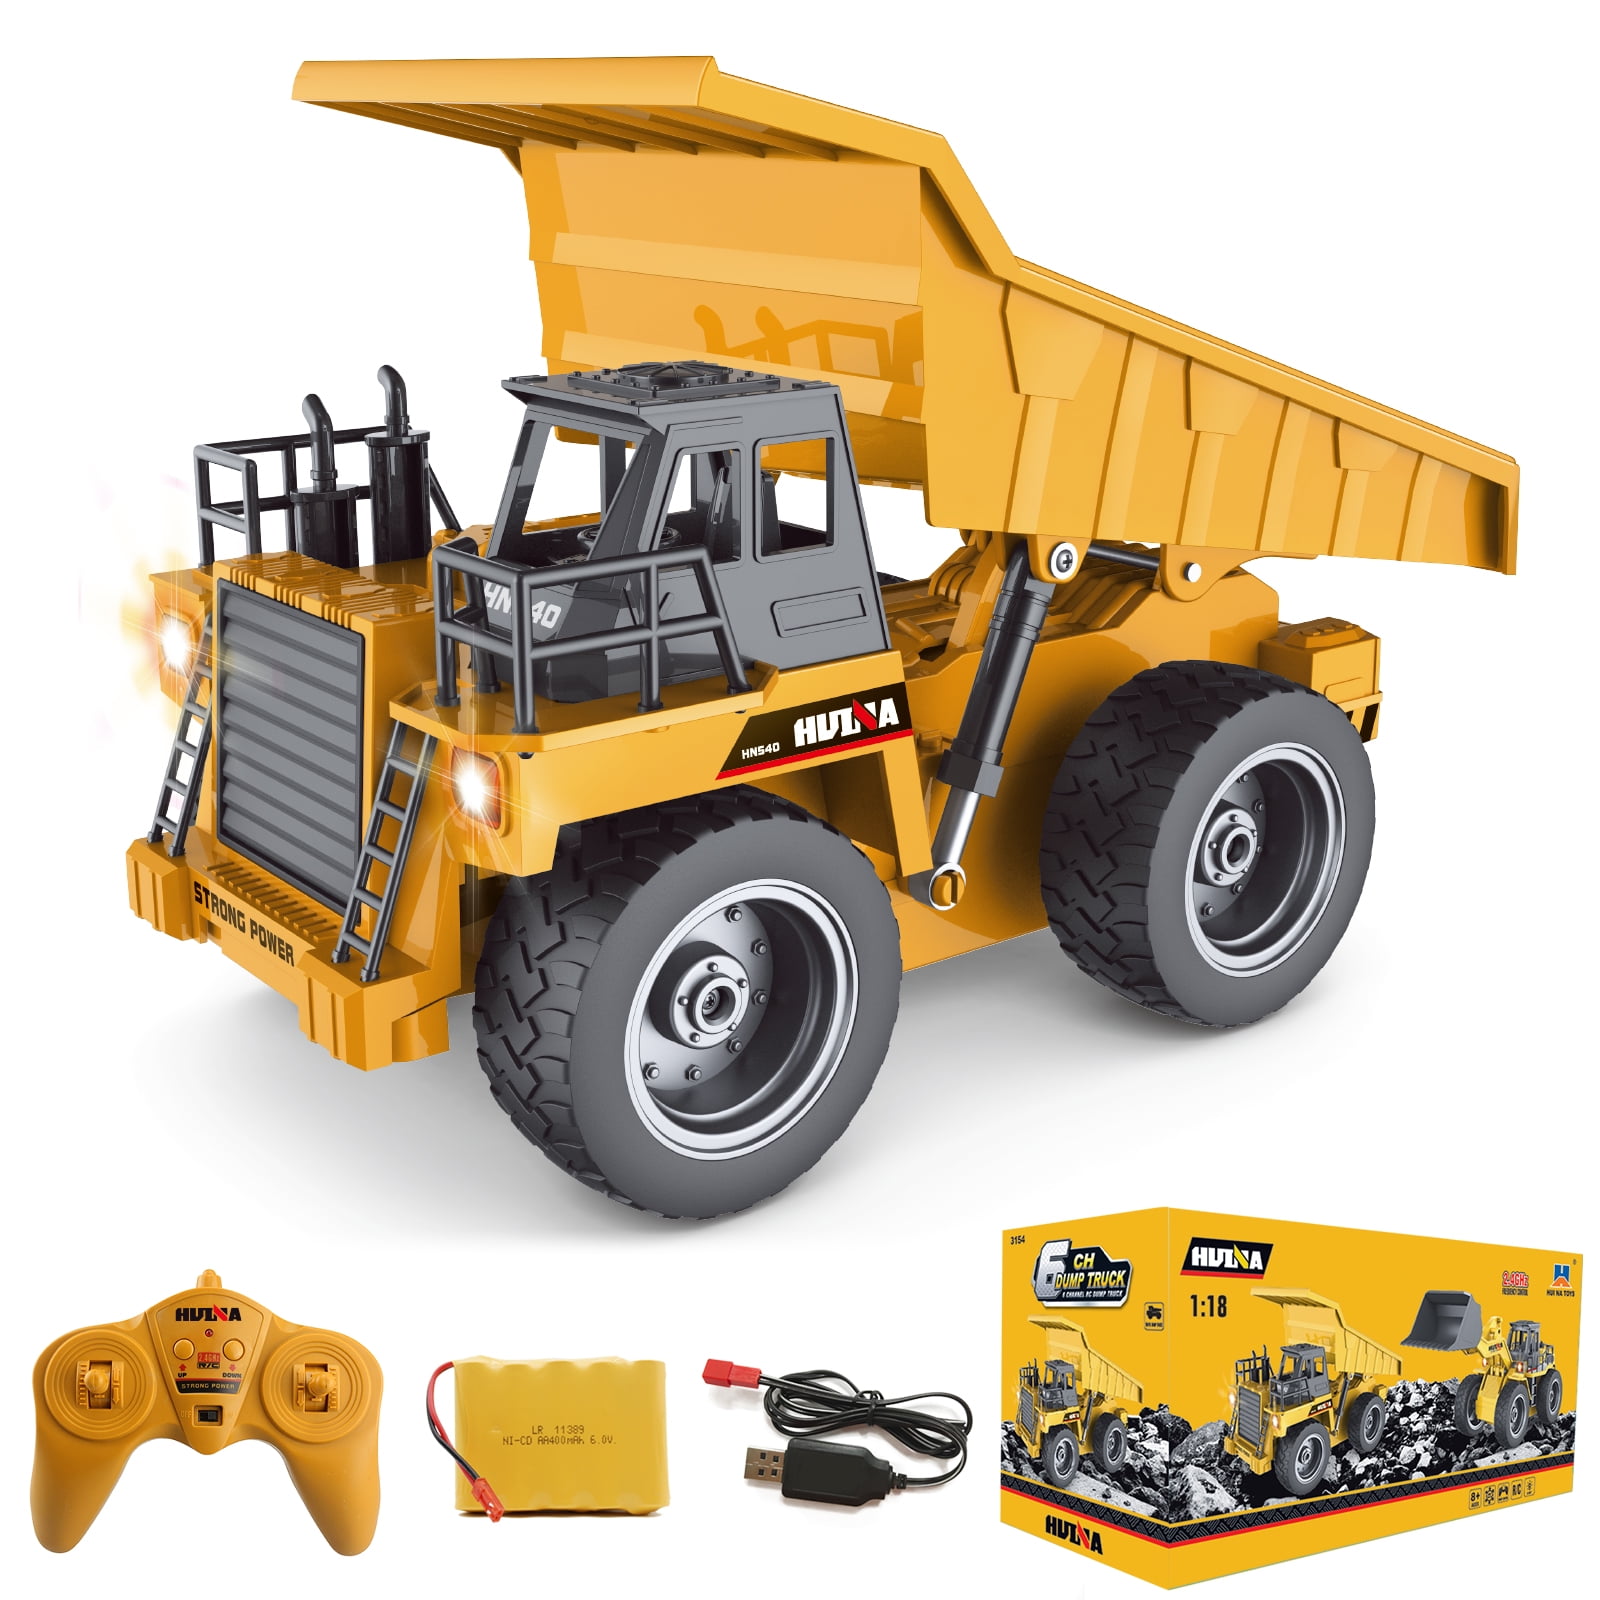 Fisca 4WD Metal Cab Remote Control Dump Trucks Toys for Kids, Adults RC ...